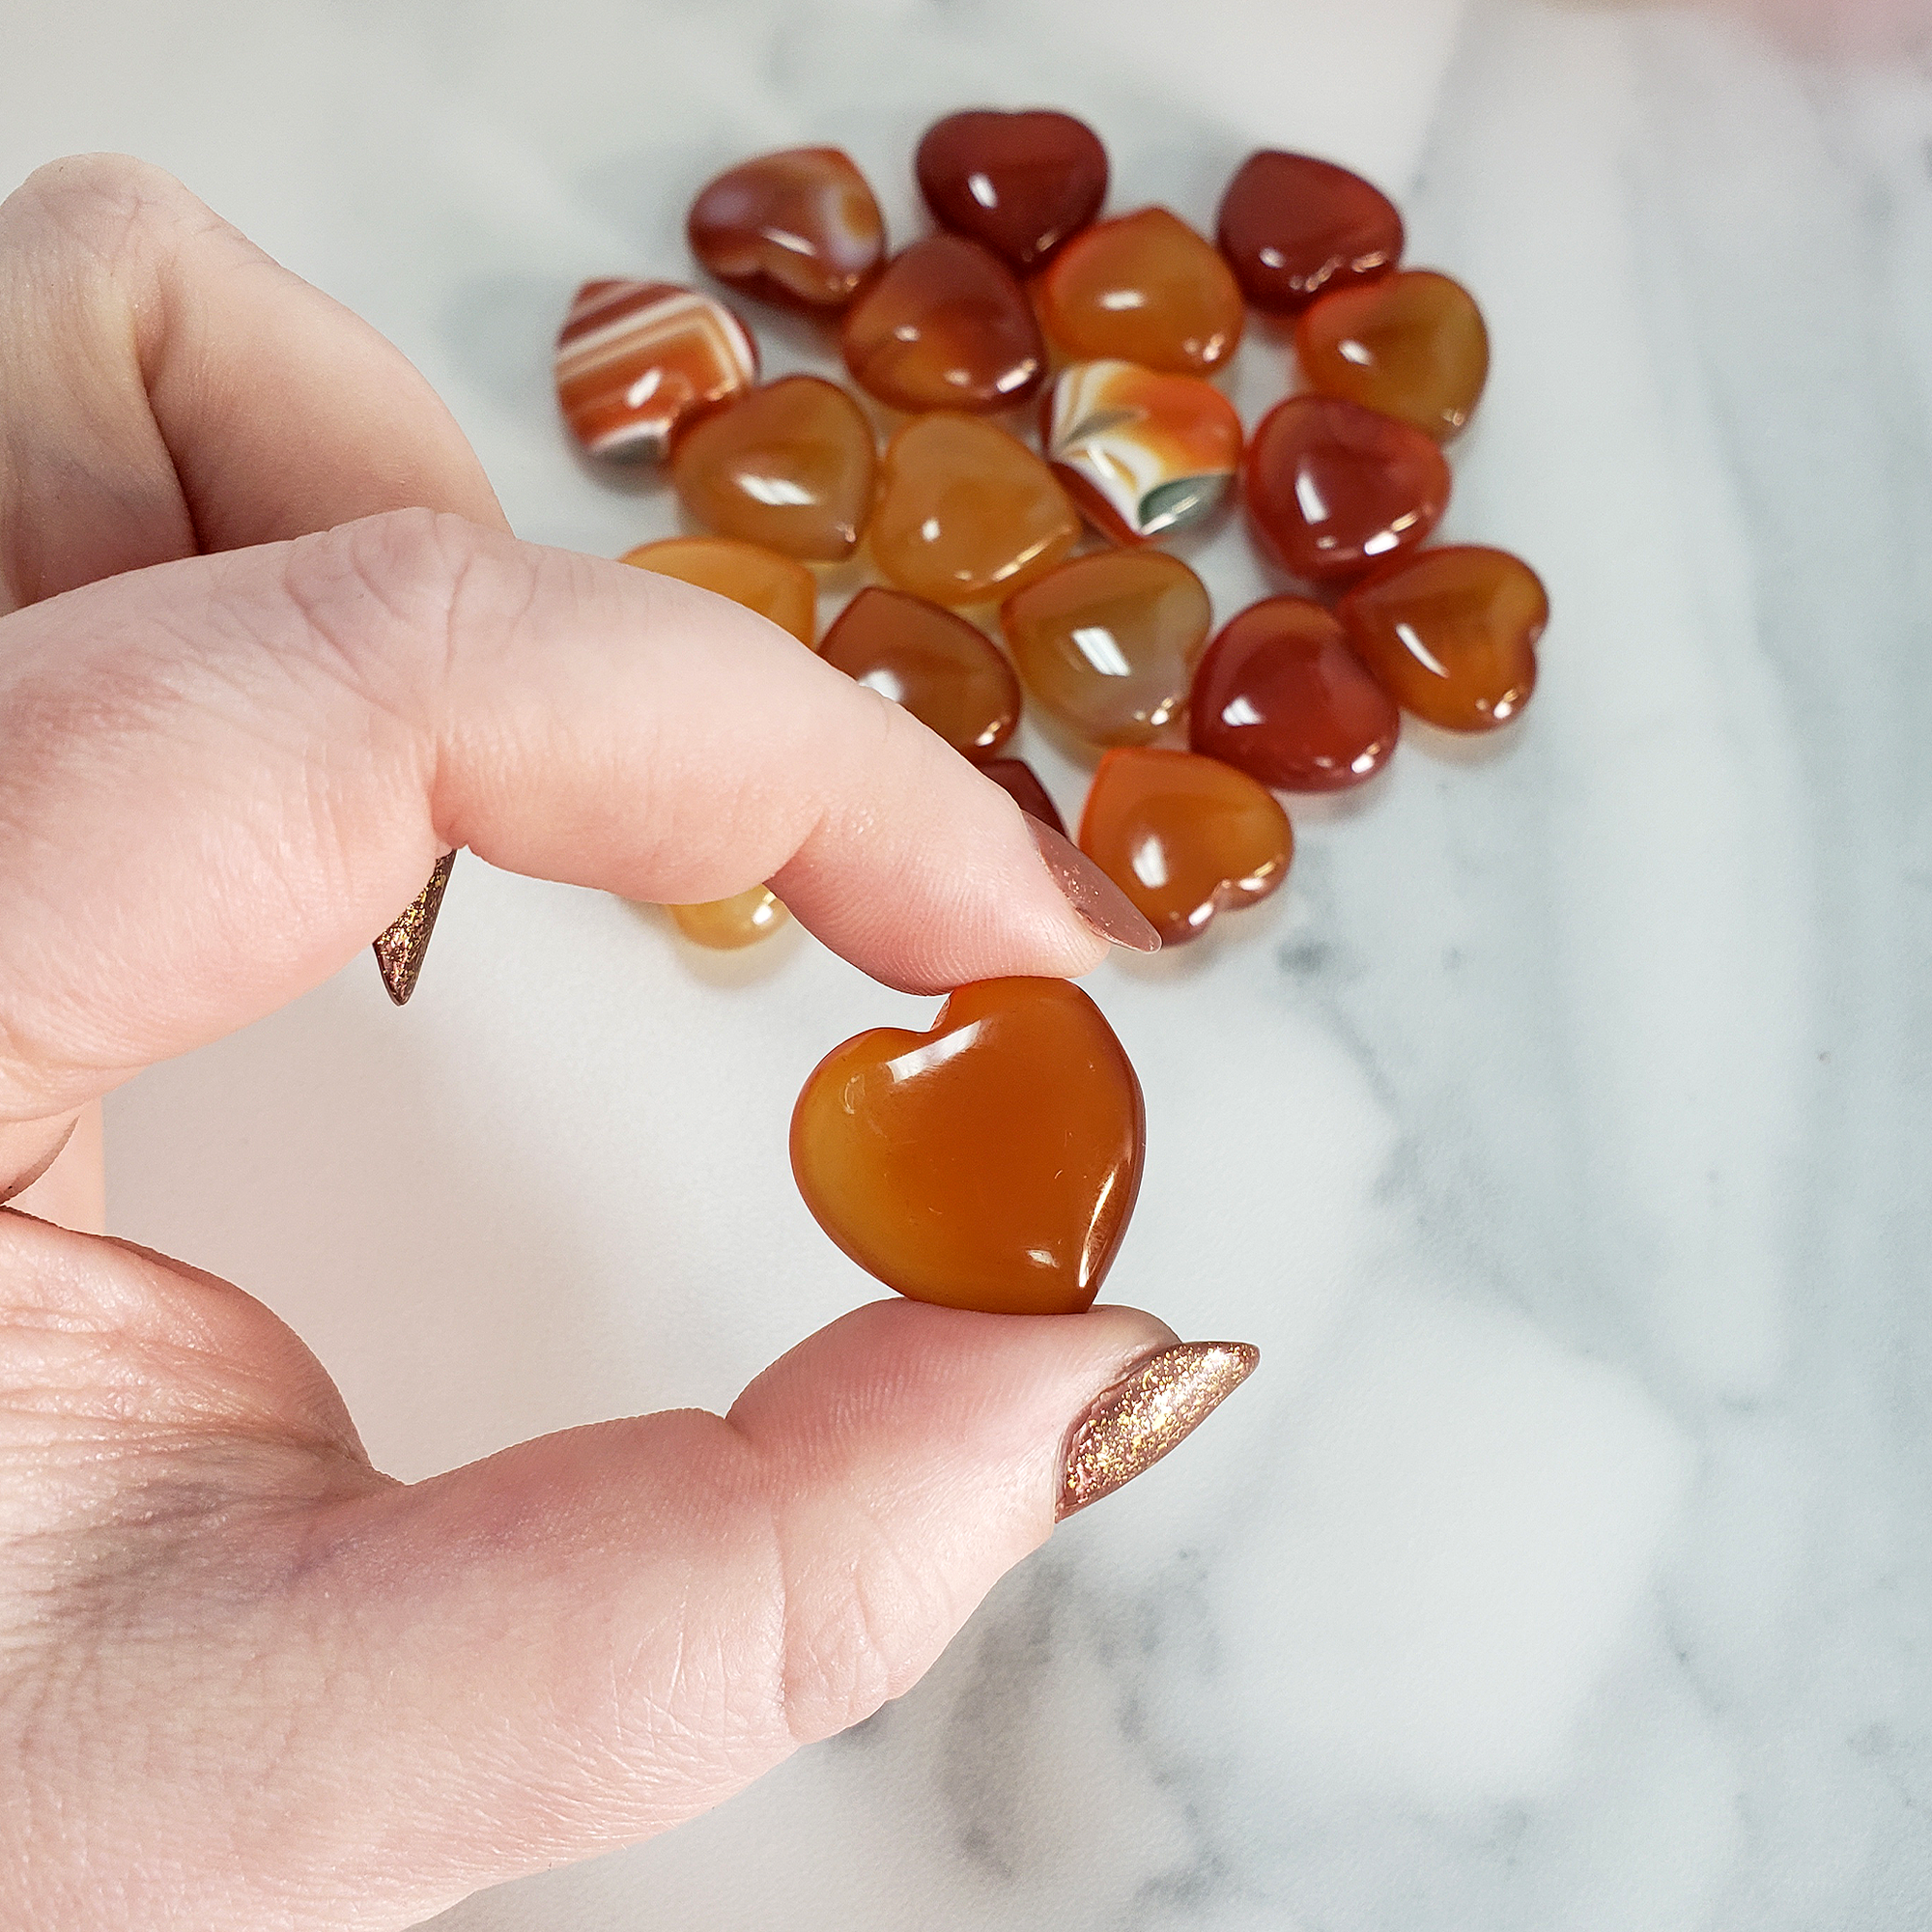 Carnelian Stone Natural Crystal Heart Mini Carving - One Gemstone Heart in Hand